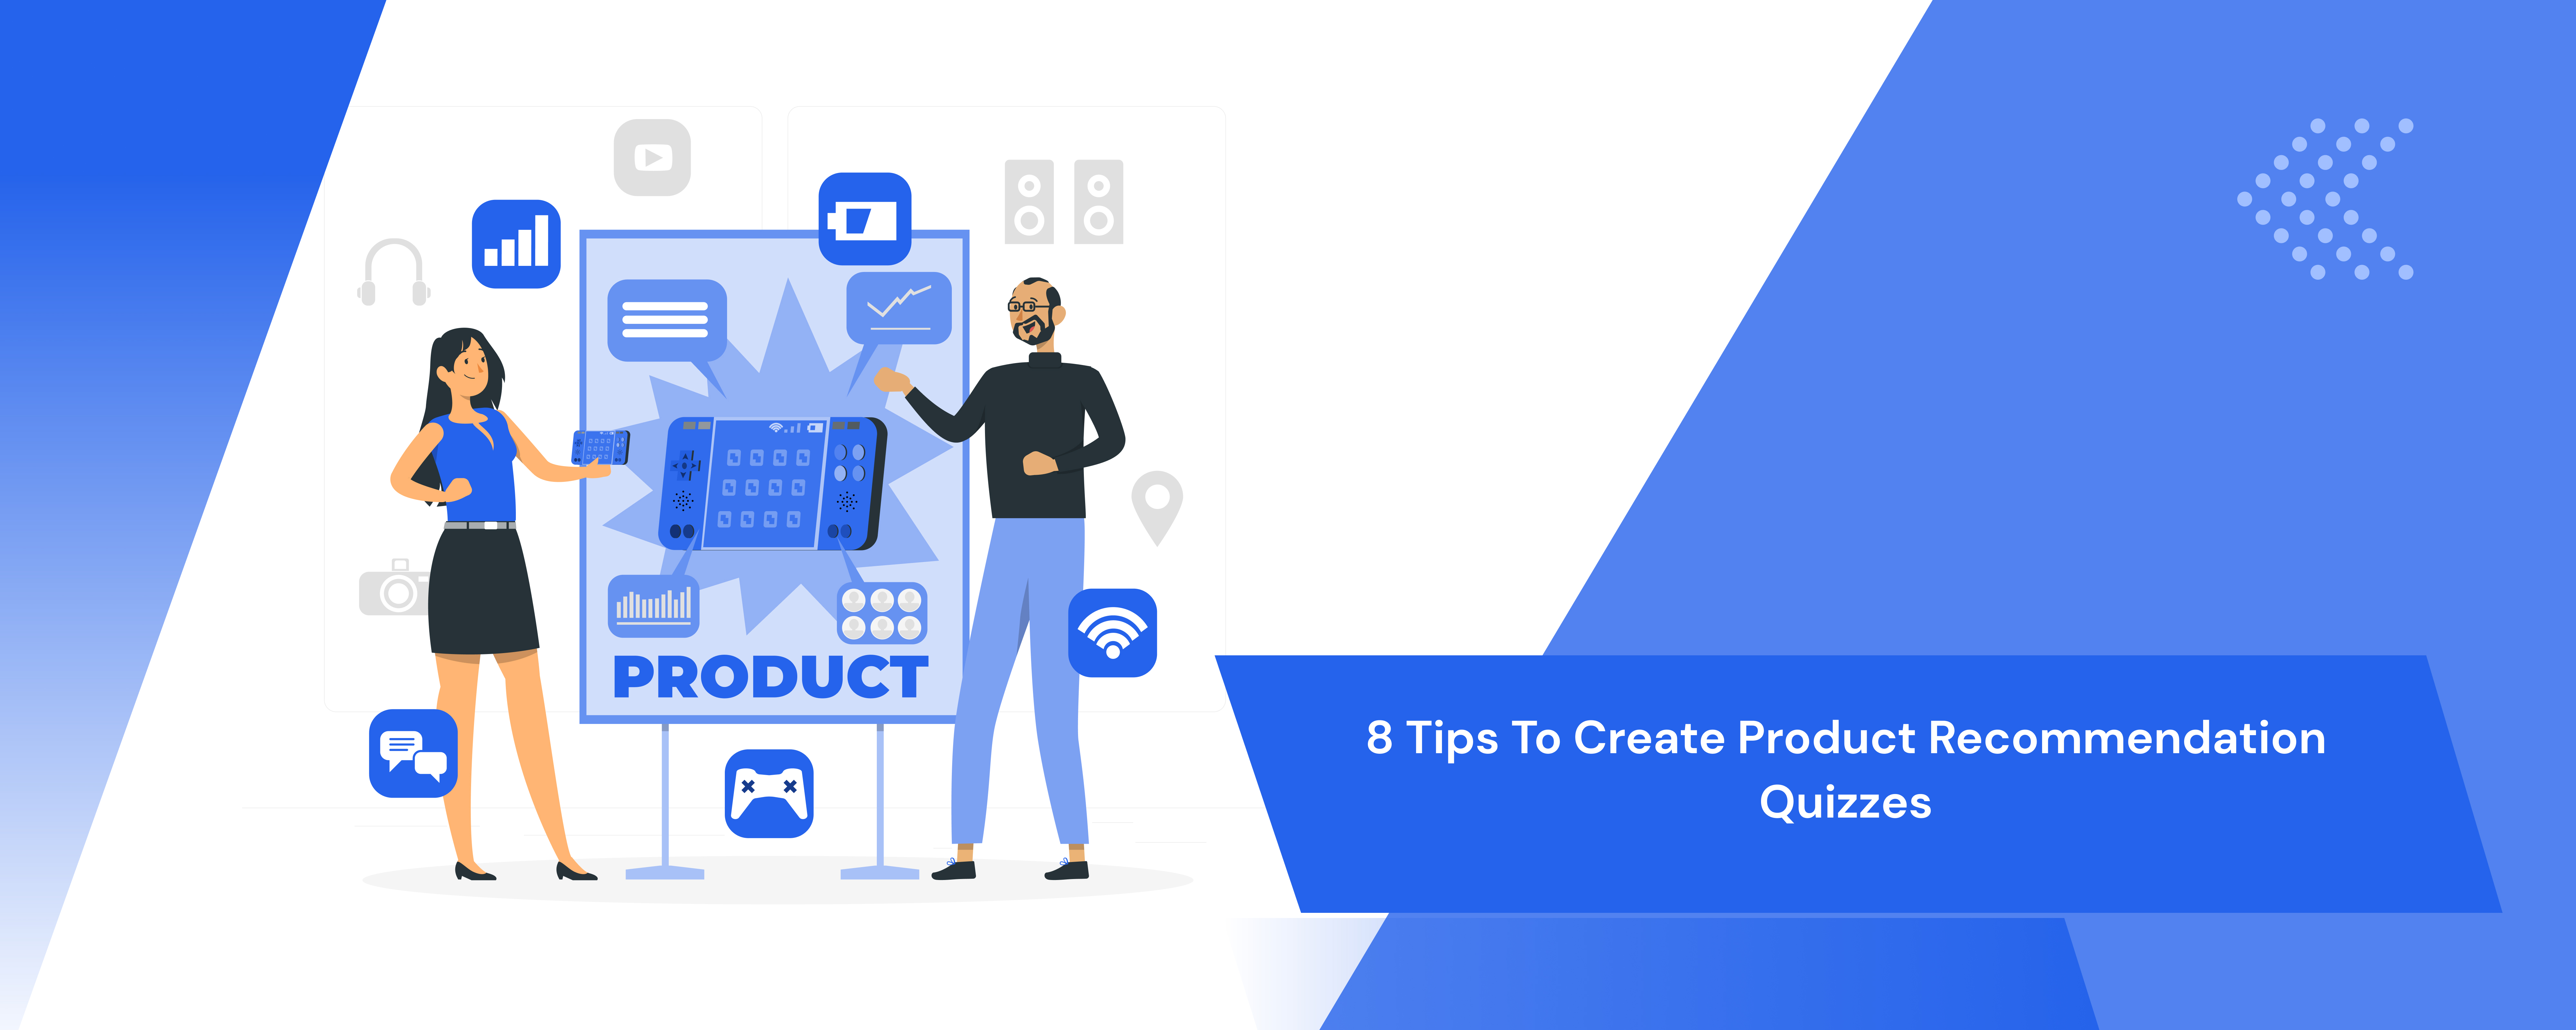 8 Tips to Create Product Recommendation Quizzes